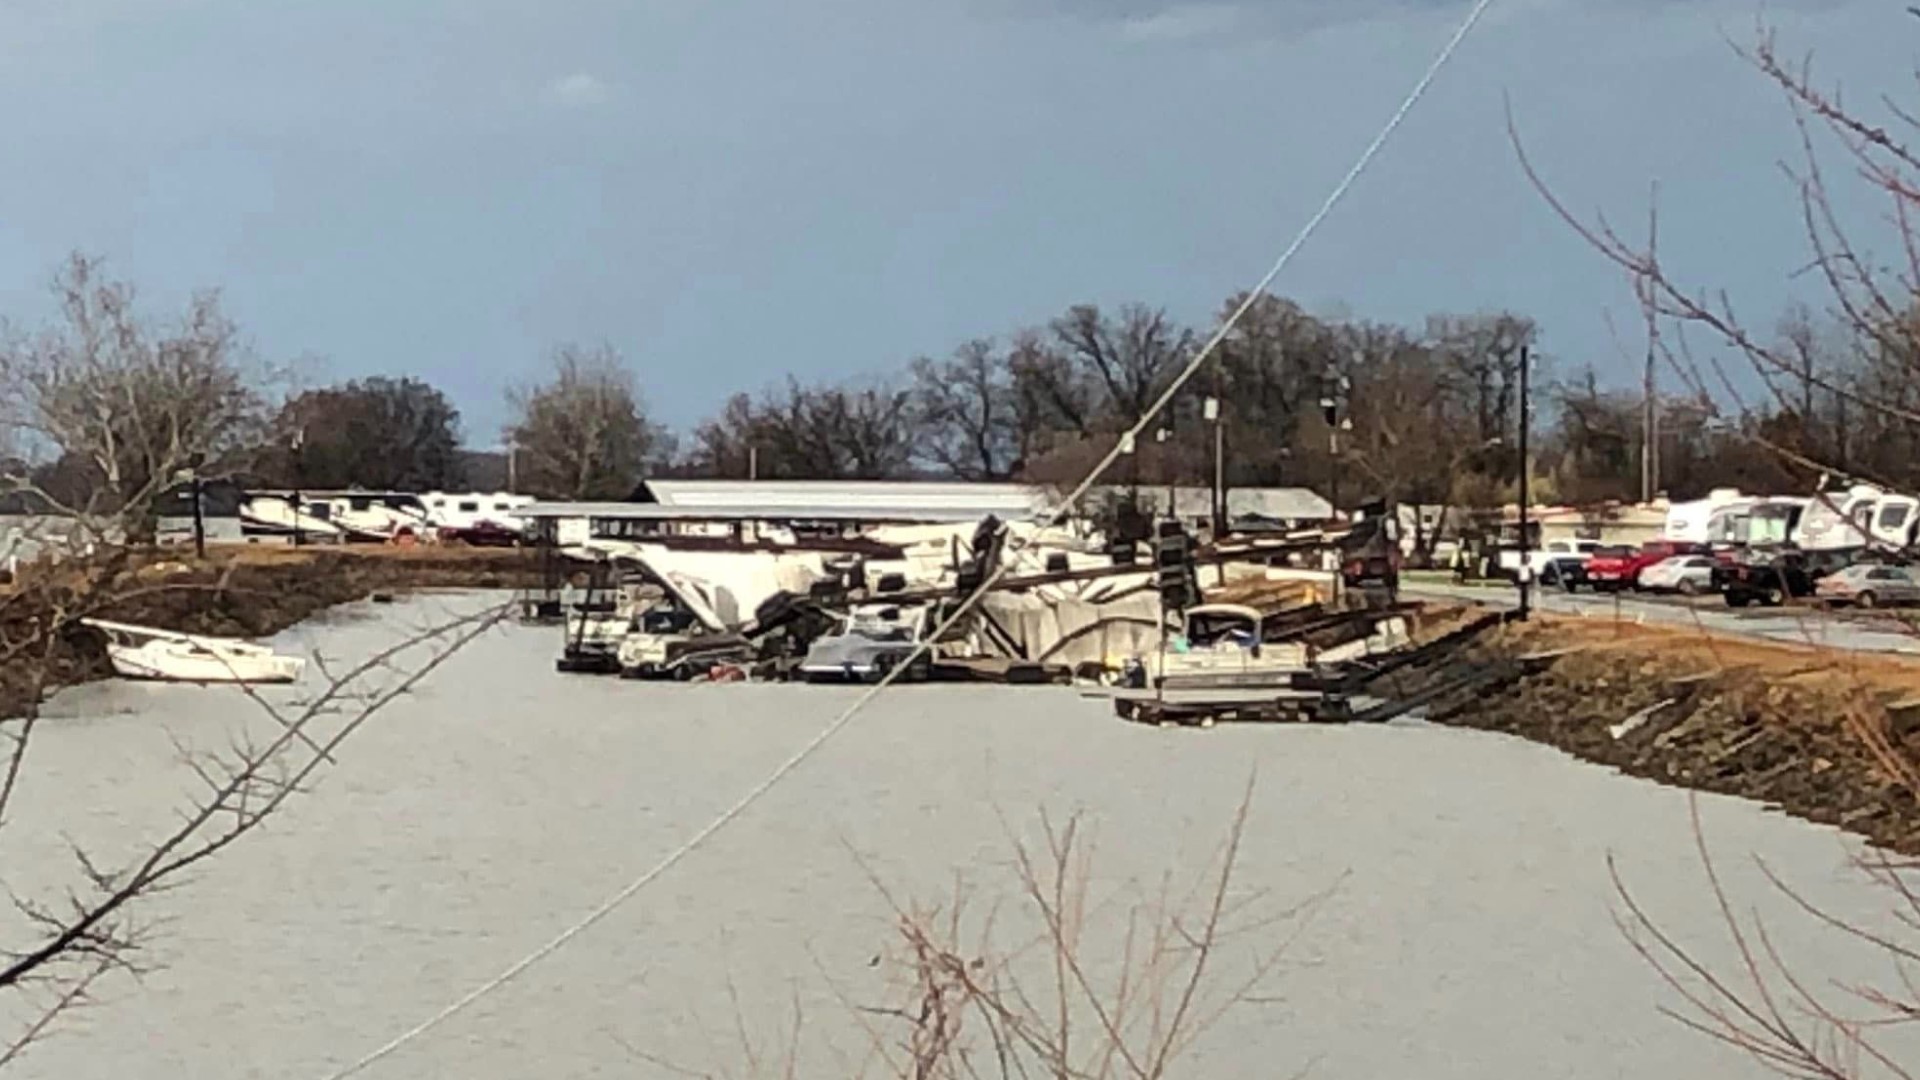 Homes and businesses in Decatur, including a marina, were damaged by severe weather.